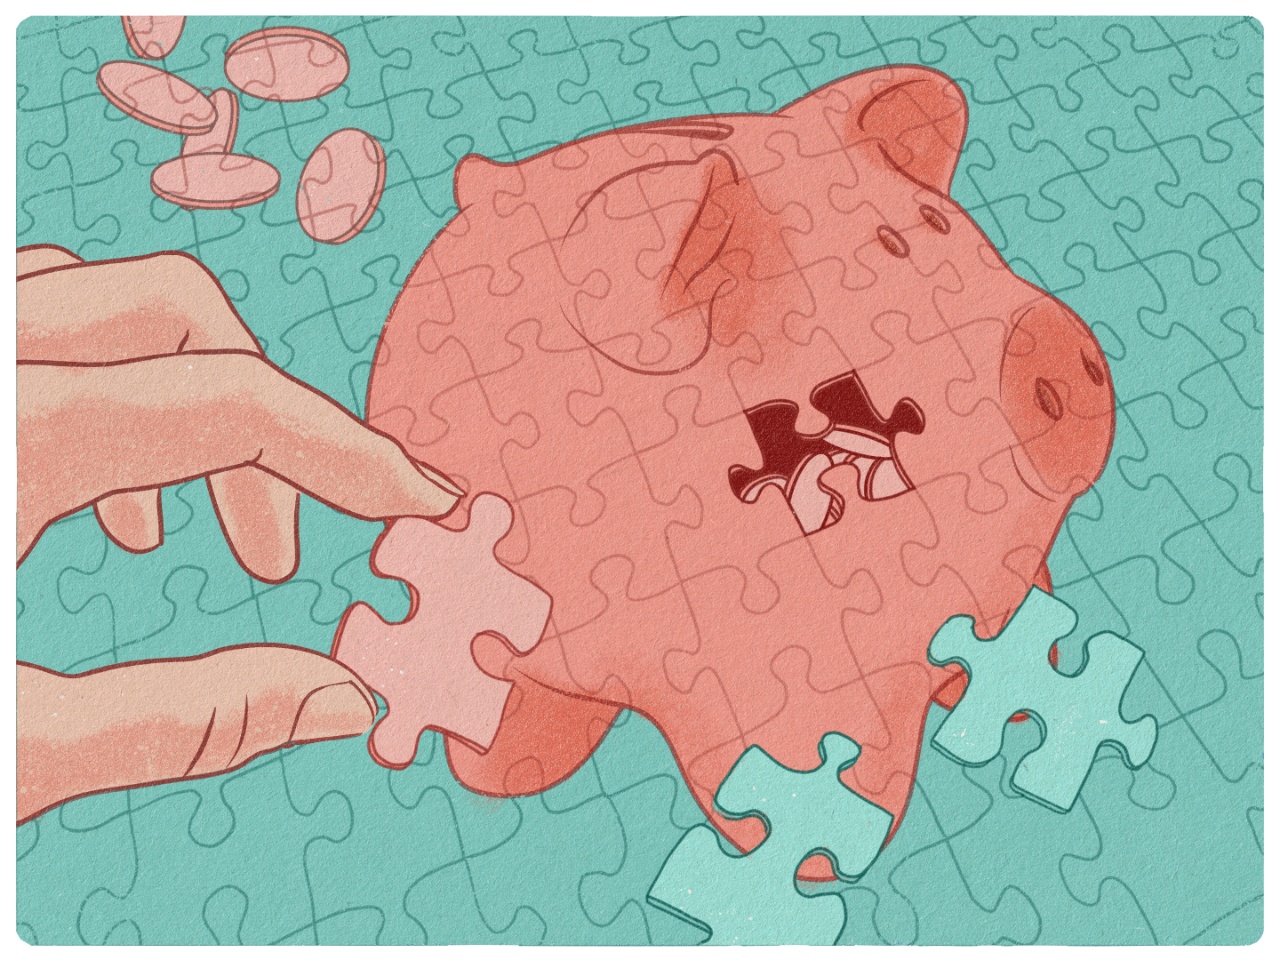 An illustration of a puzzle featuring a piggy bank